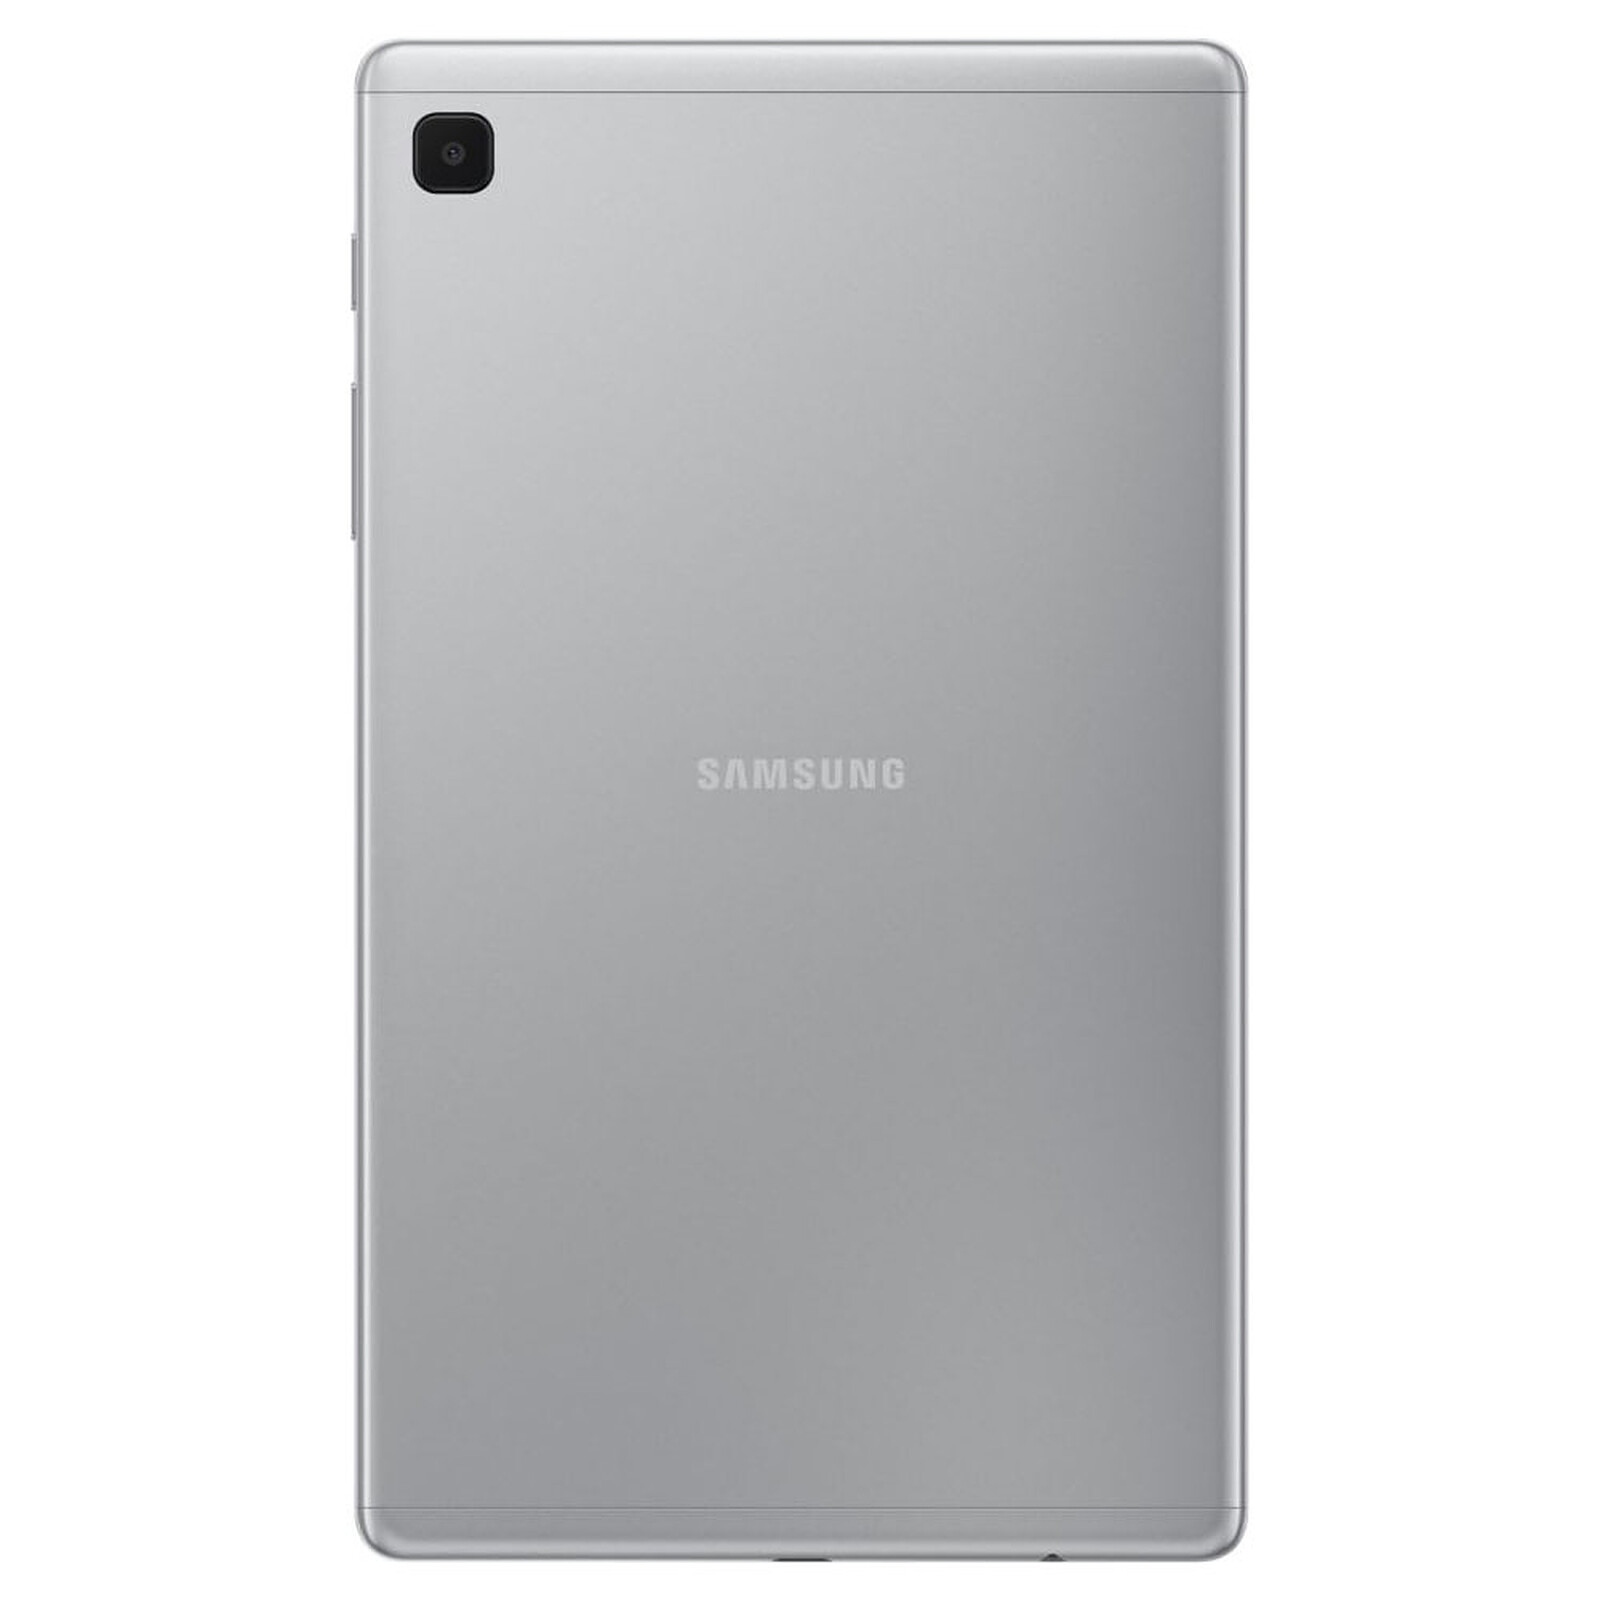 Dimprice | Tablette Samsung Galaxy Tab A7 Lite 8,7 pouces Wi-Fi Android 32  Go - Gris